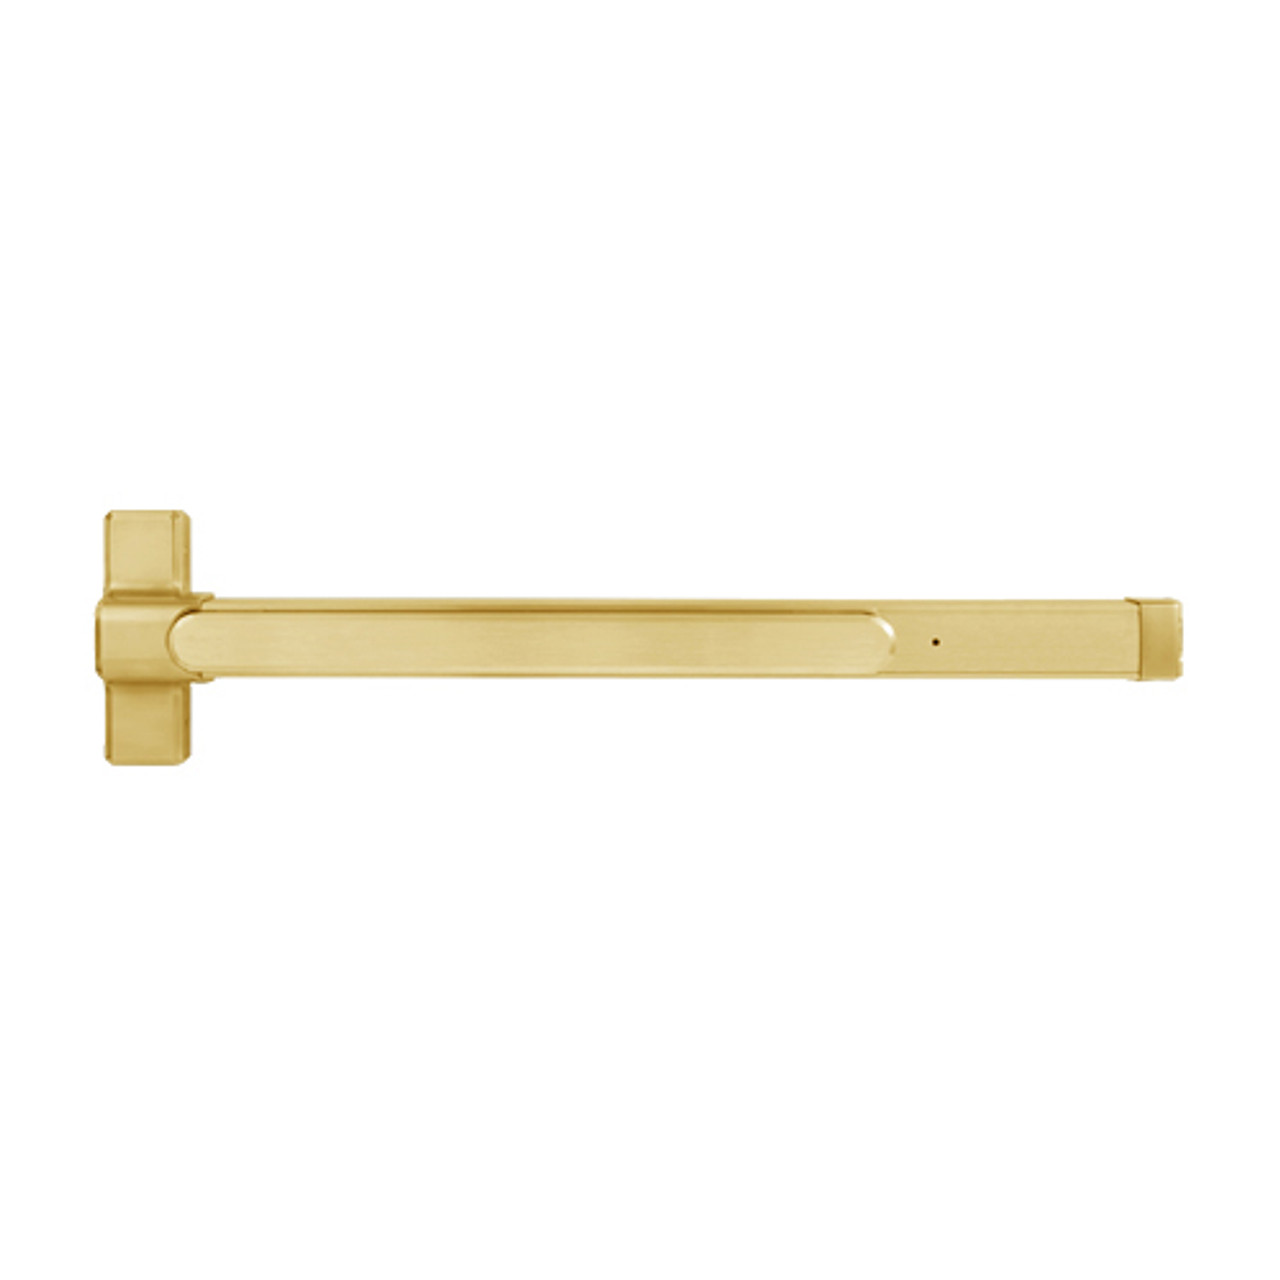 QED129LRX-36-8-605 Stanley QED100 Series Heavy Duty Concealed Vertical Rod Fire Rated Exit Device in Bright Brass Finish